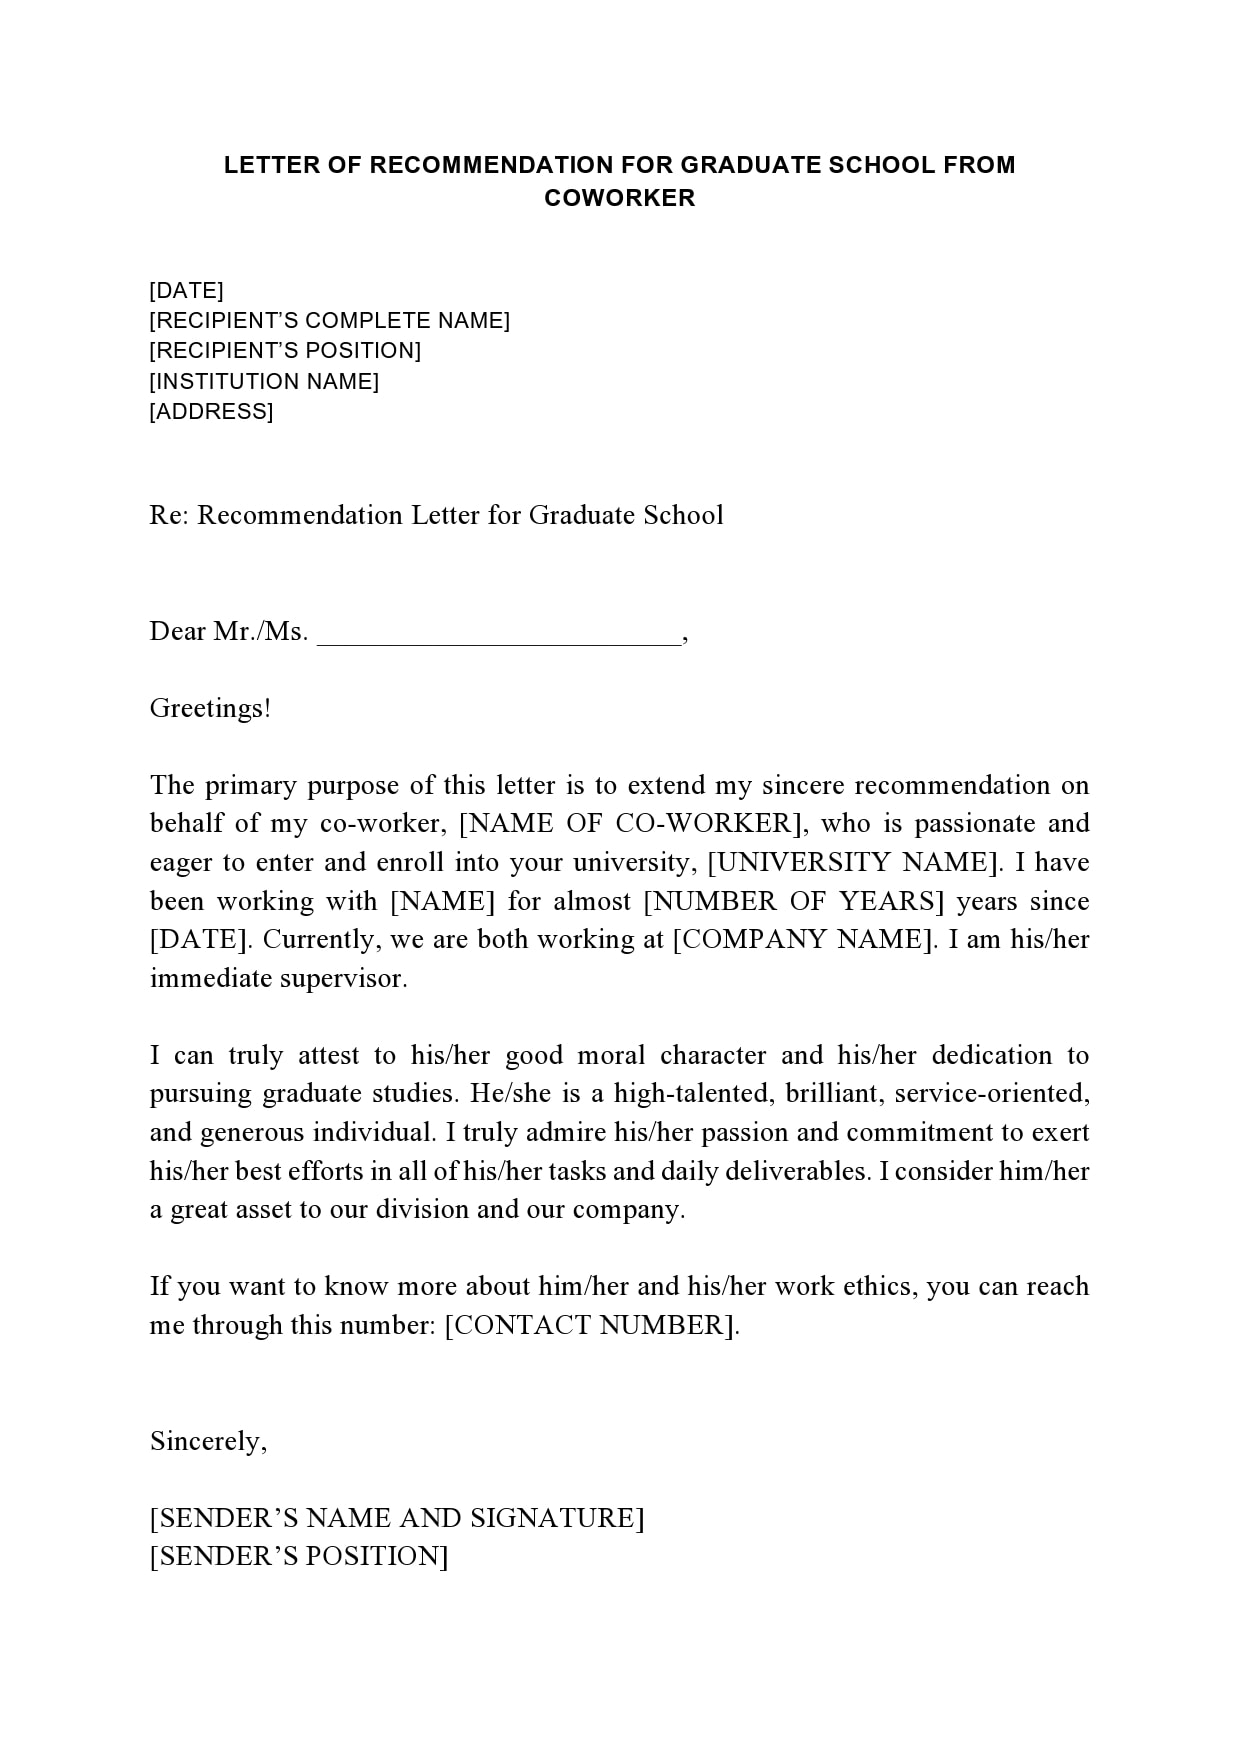 Colleague Letter Of Recommendation from templatearchive.com